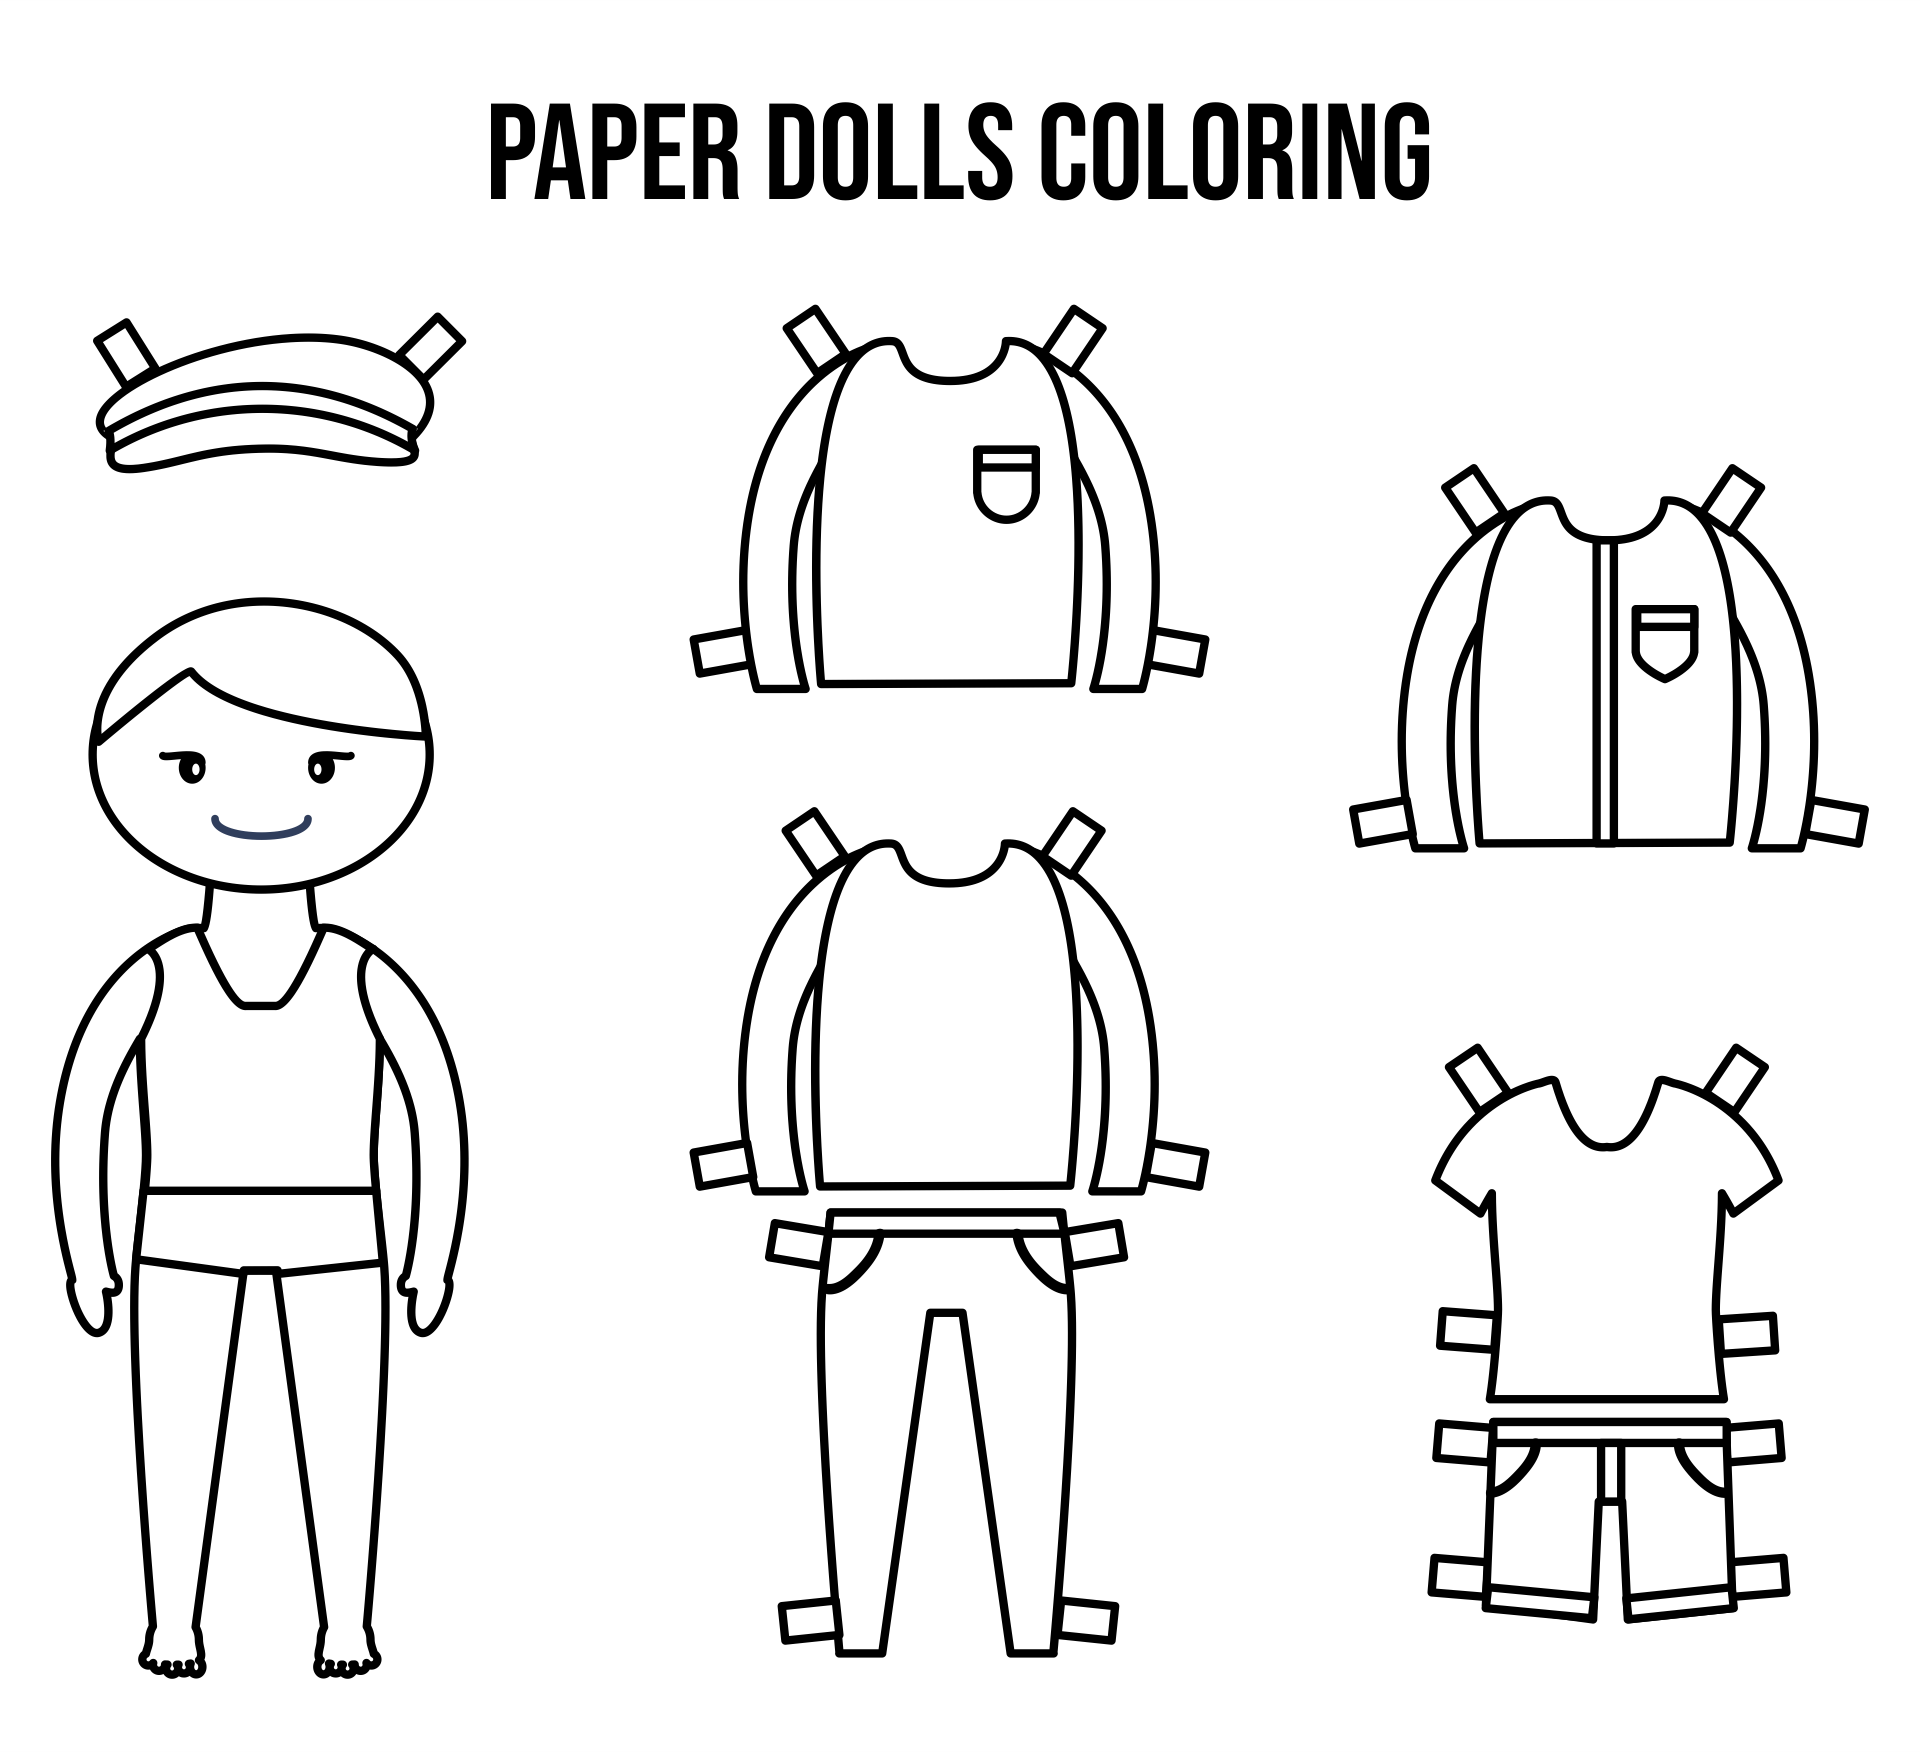 Coloring Paper Dolls